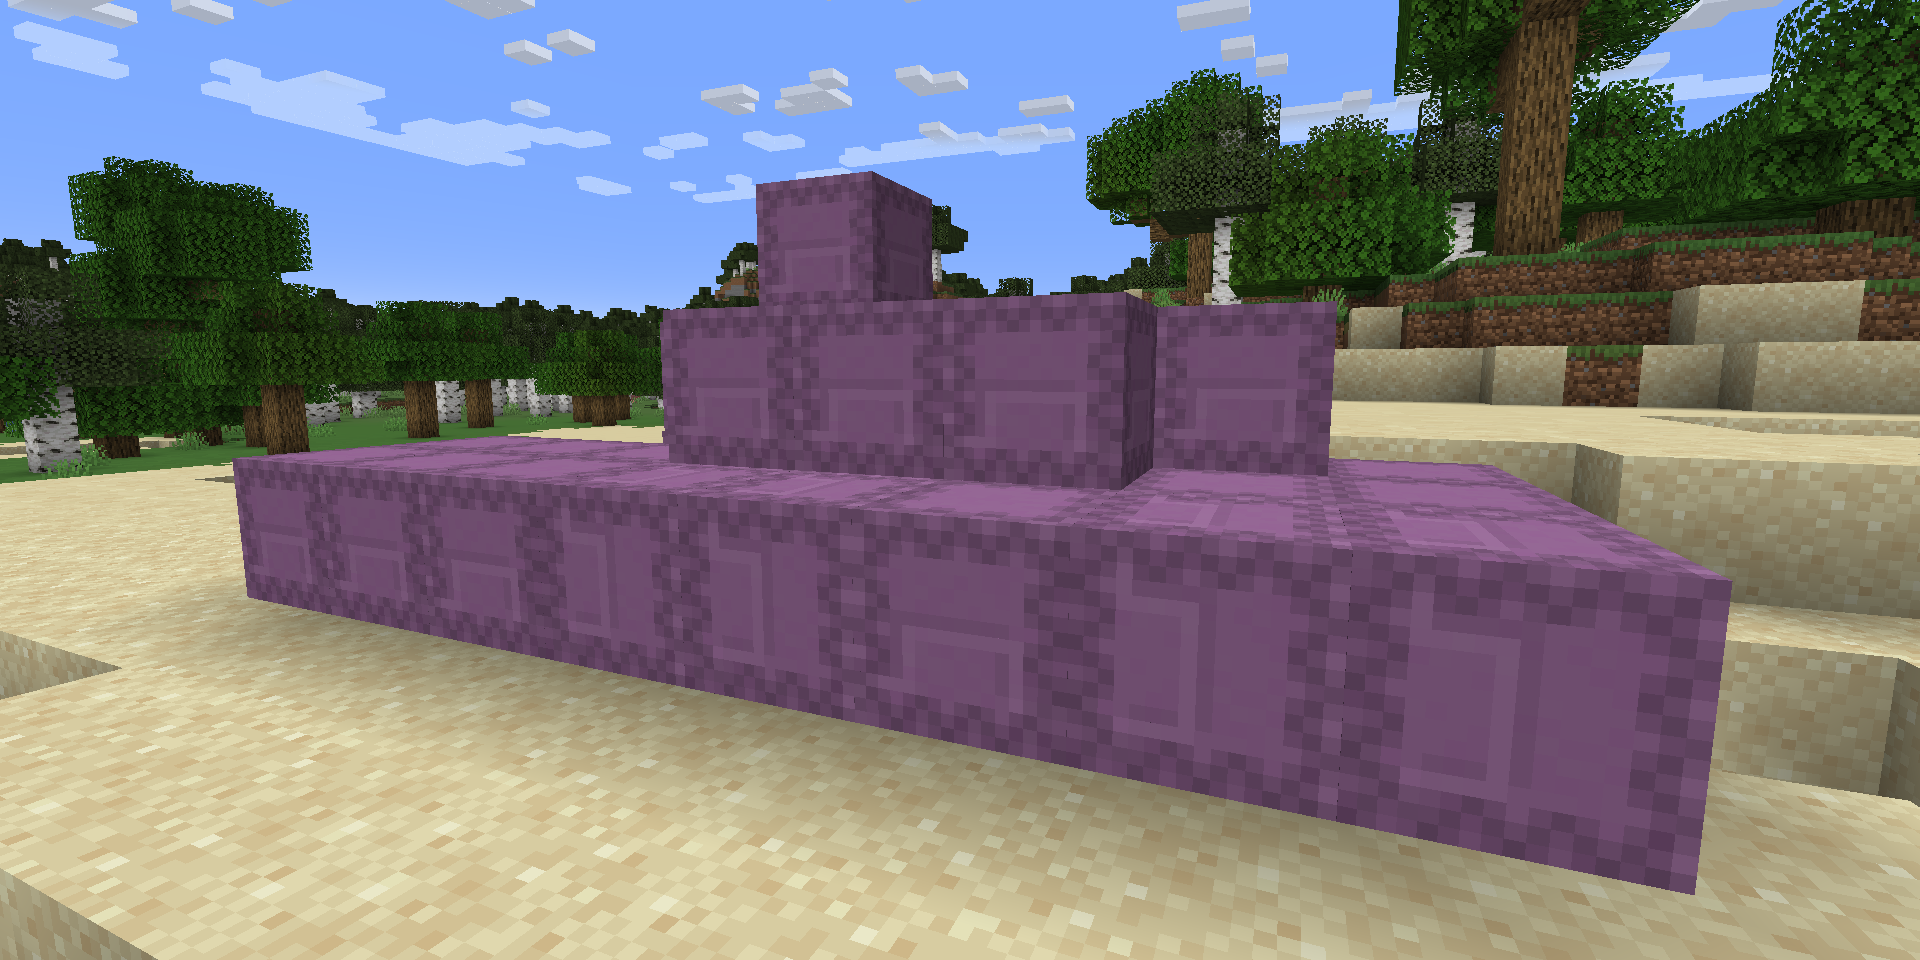 A pile of Minecraft Shulker boxes